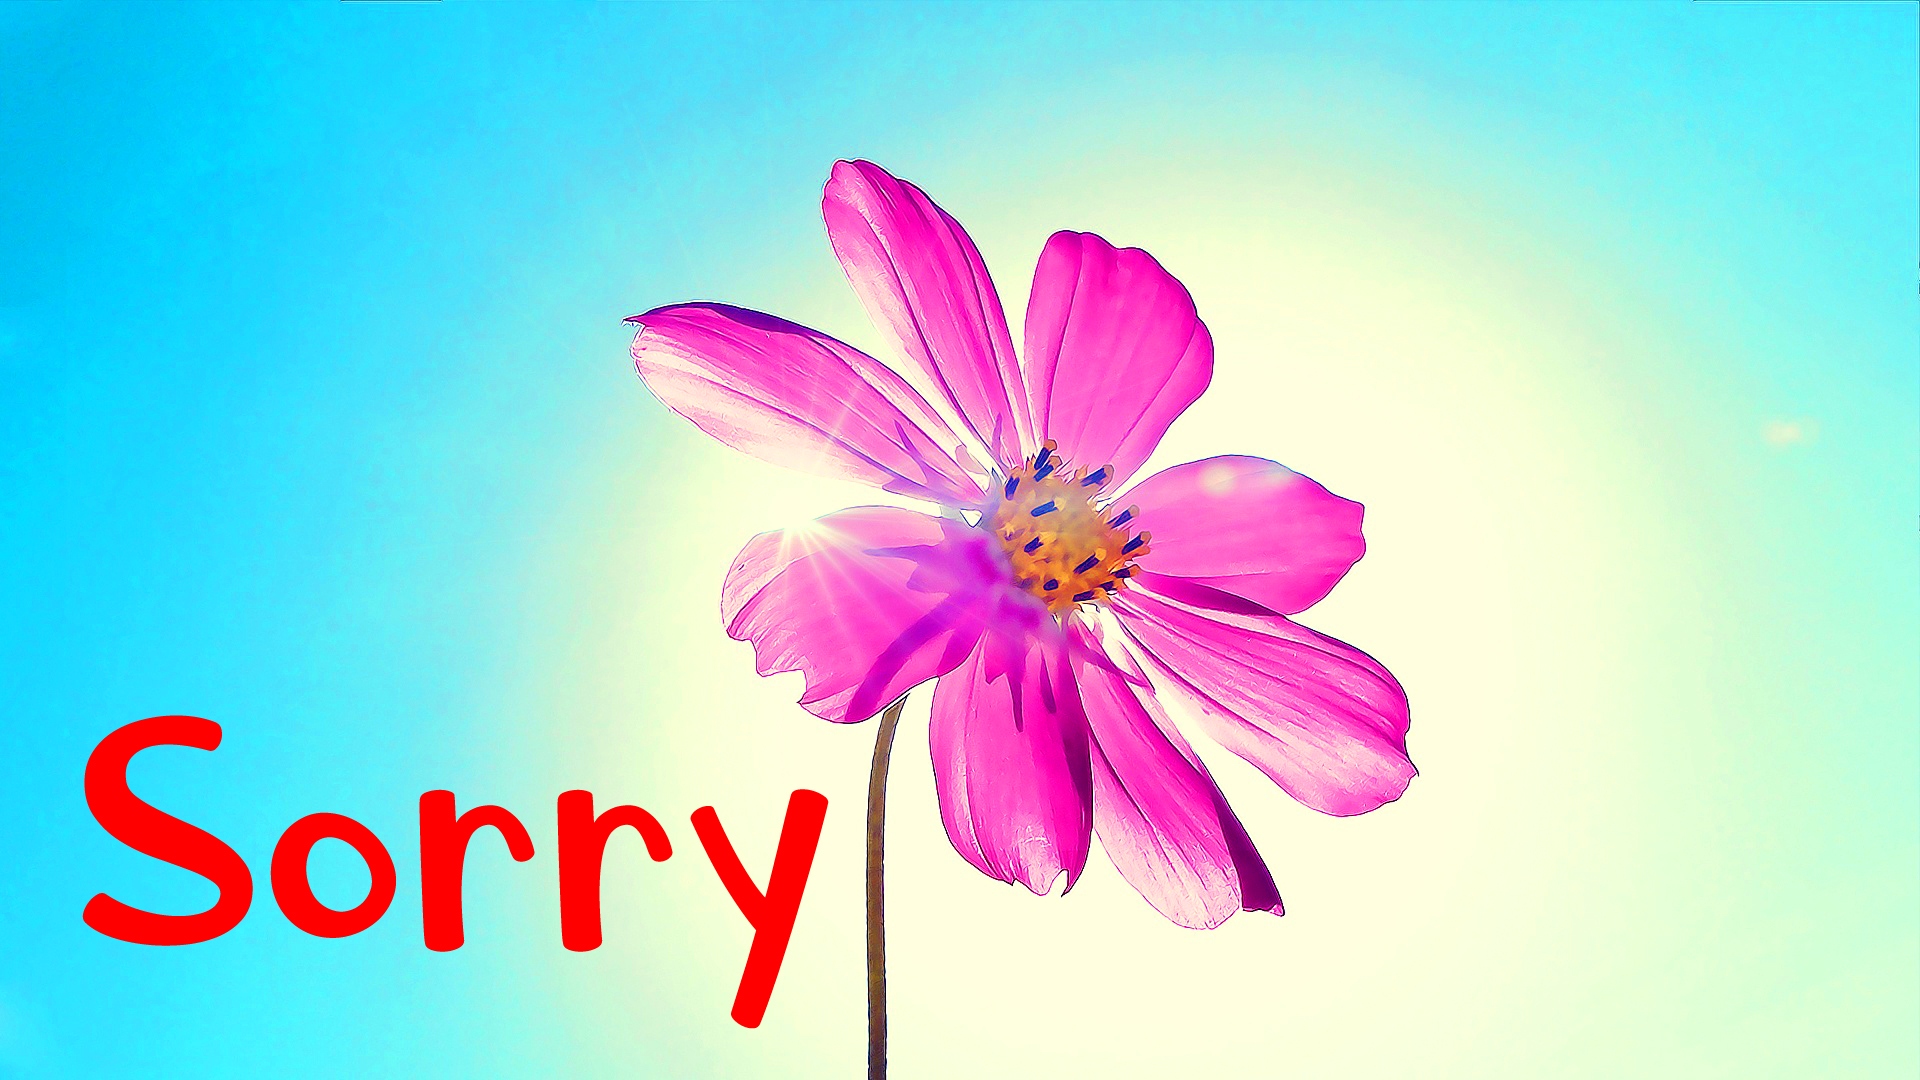 I am Sorry Images Wallpaper Photo Download 